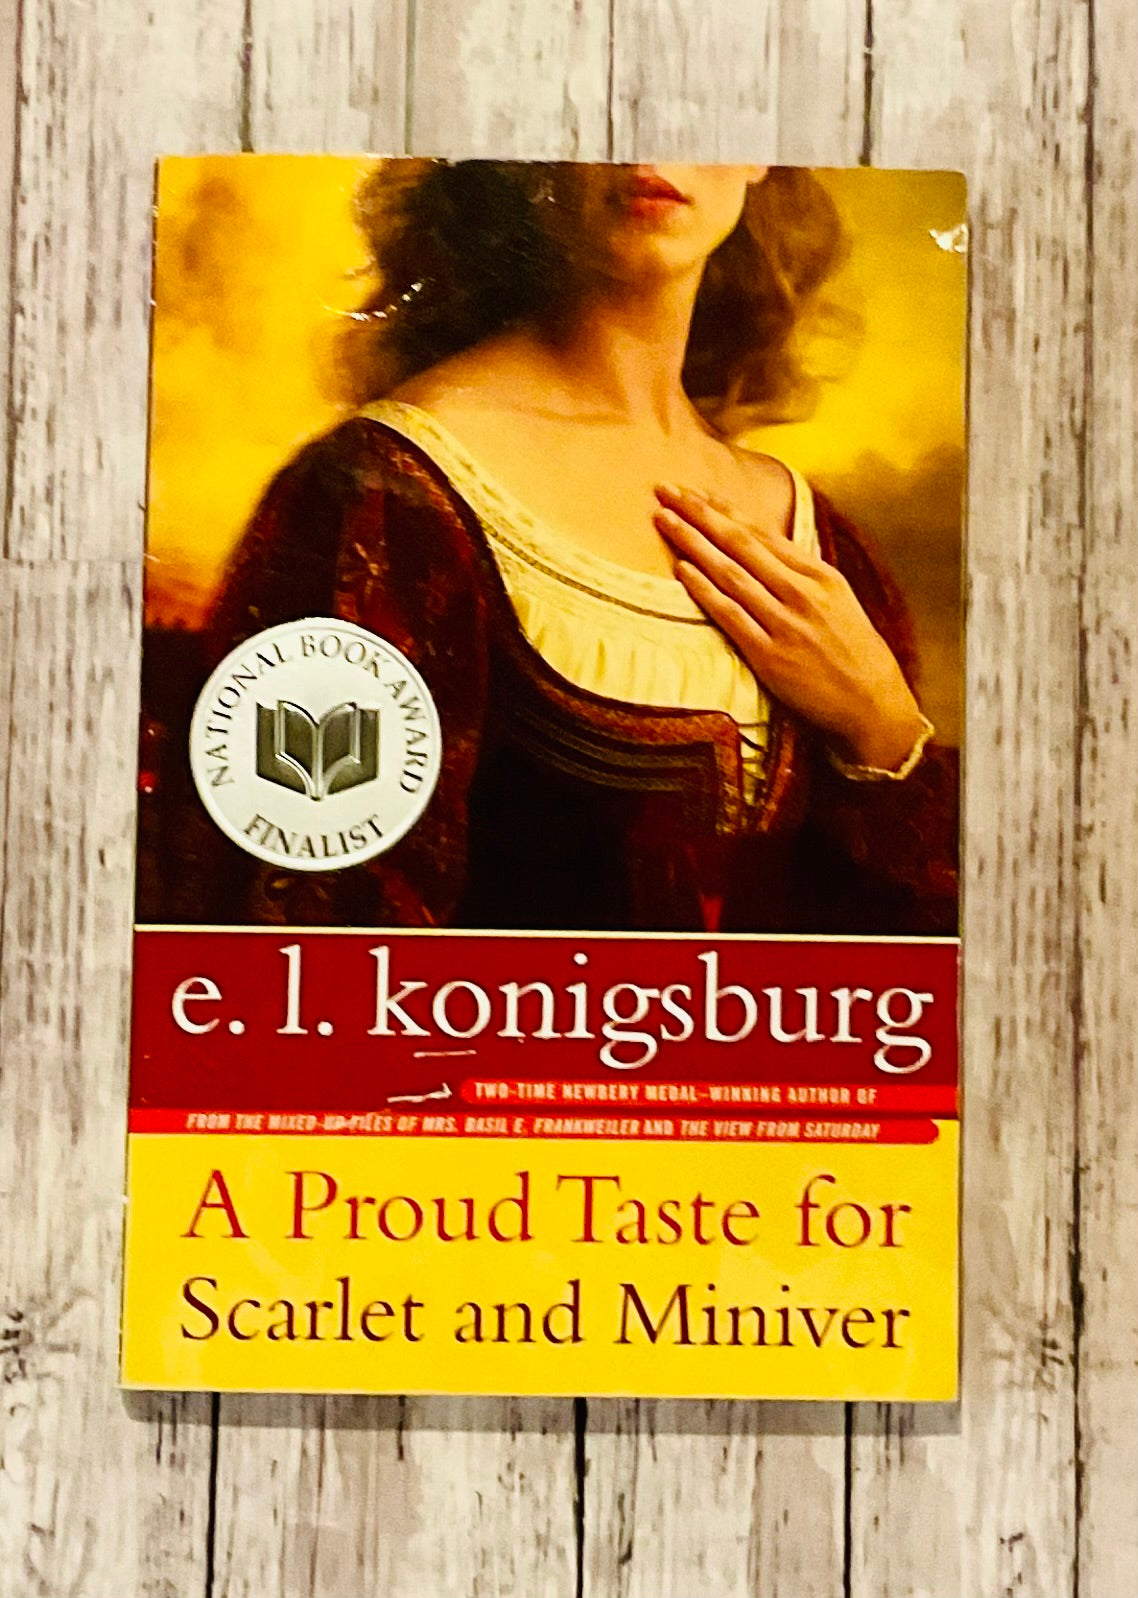 A Proud Taste for Scarlet and Miniver - Anchored Homeschool Resource Center